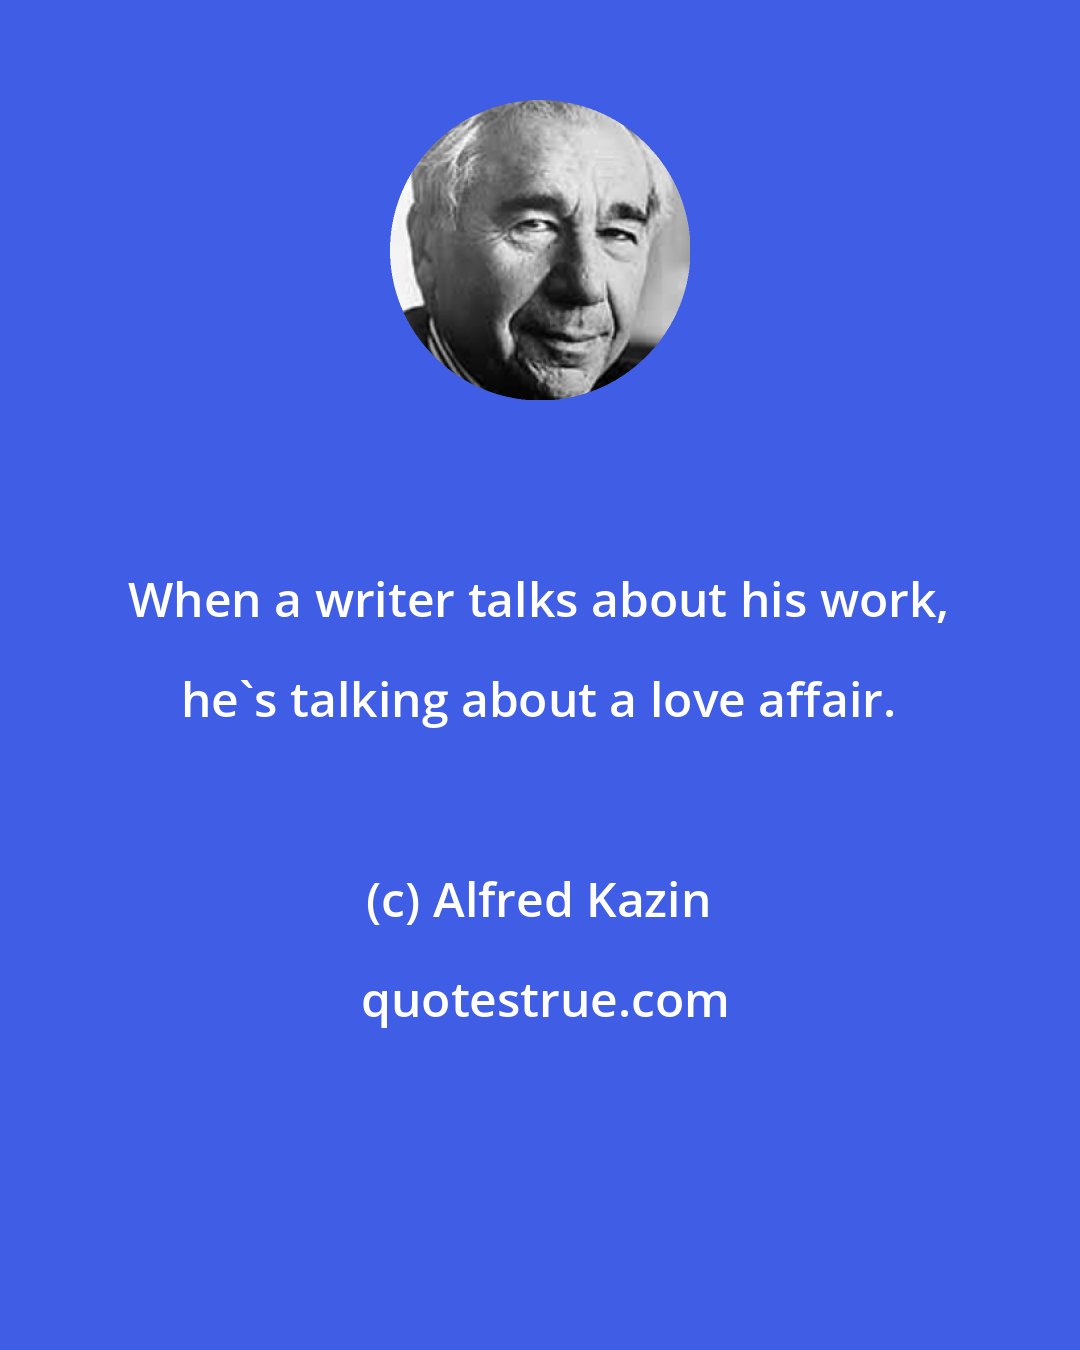 Alfred Kazin: When a writer talks about his work, he's talking about a love affair.